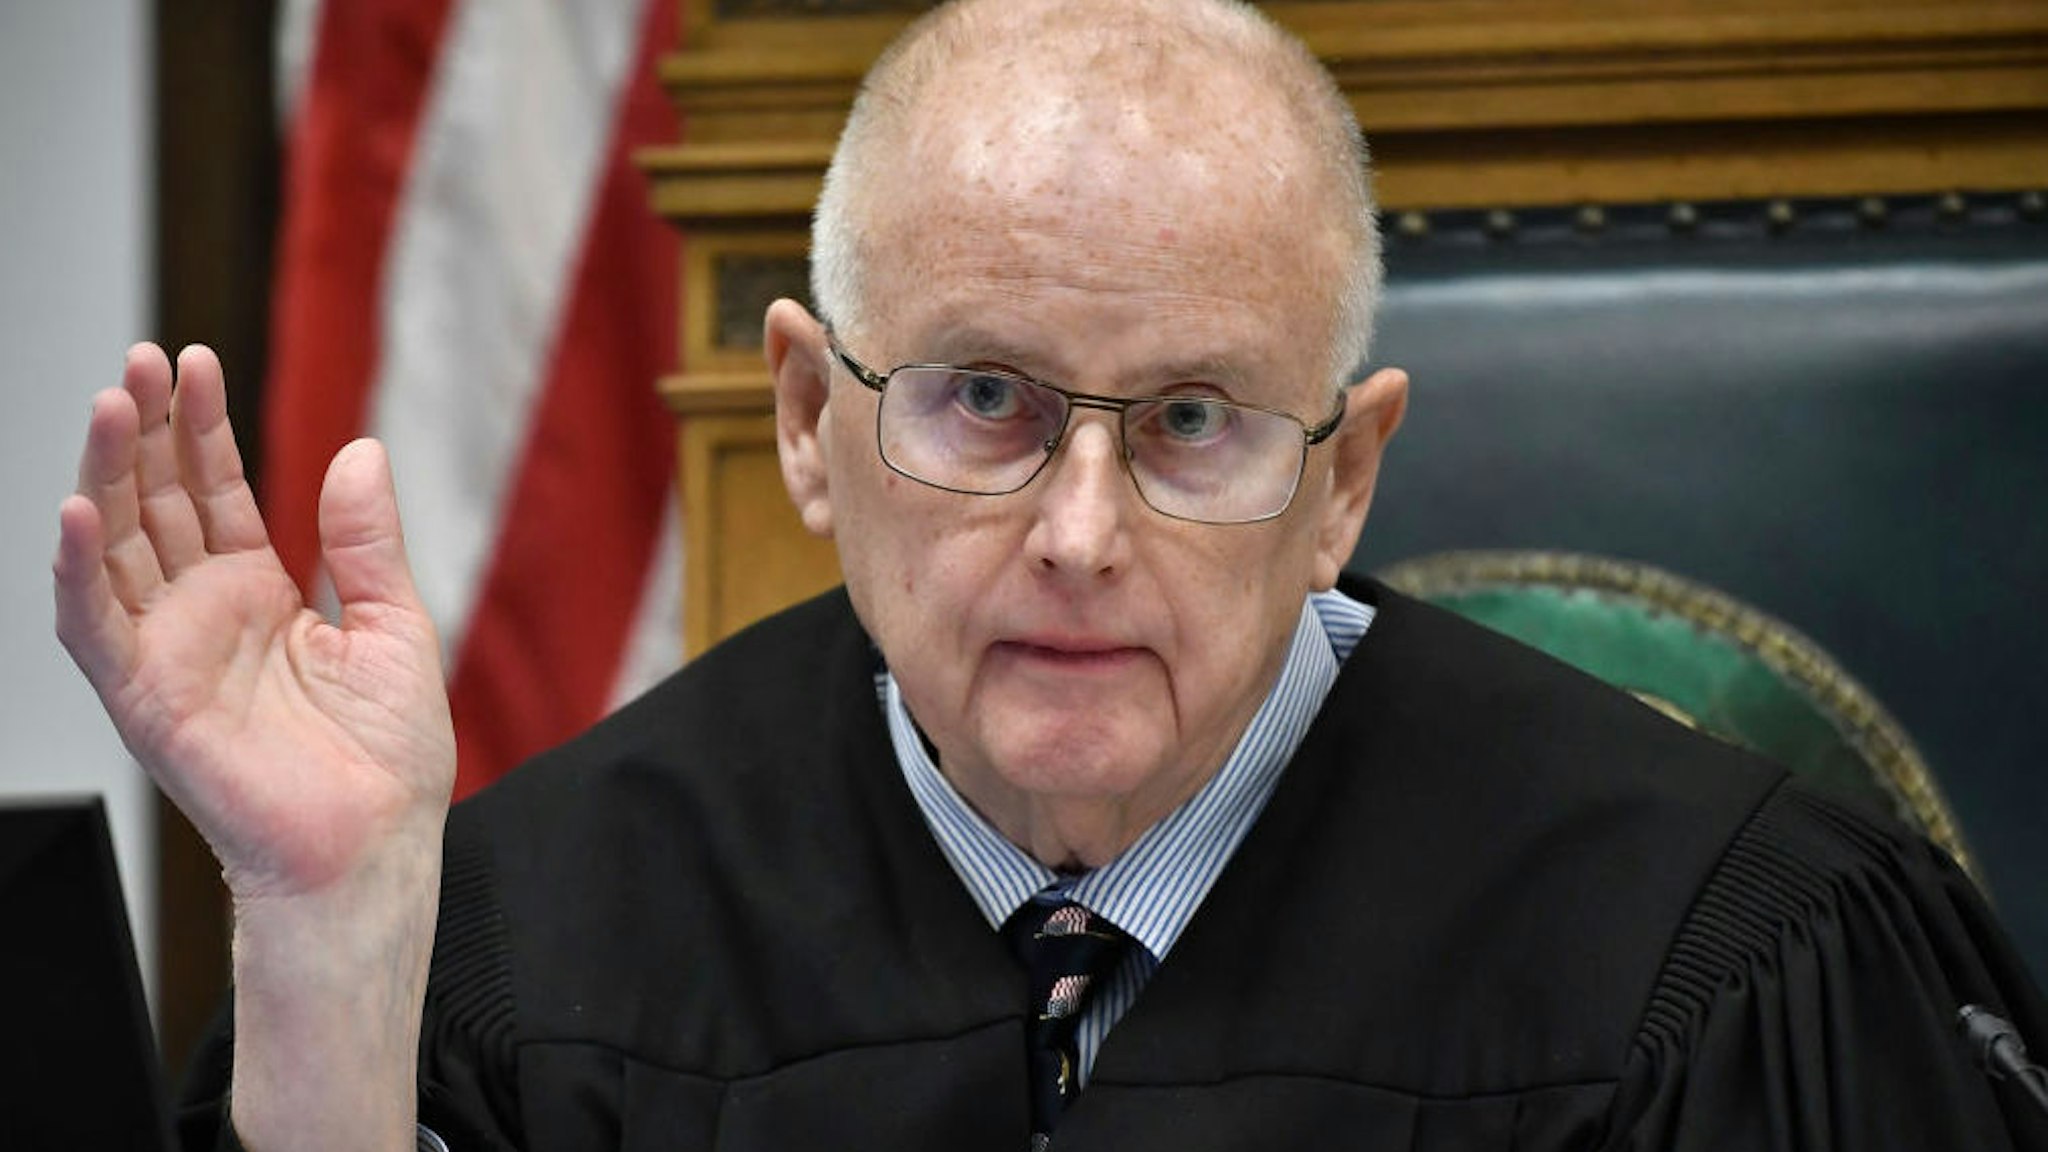 Judge Bruce Schroeder addresses an objection made by Assistant District Attorney Thomas Binger regarding the scope of testimony from the defense's expert use-of-force witness John Black during Kyle Rittenhouse's trial at the Kenosha County Courthouse on November 11, 2021 in Kenosha, Wisconsin.